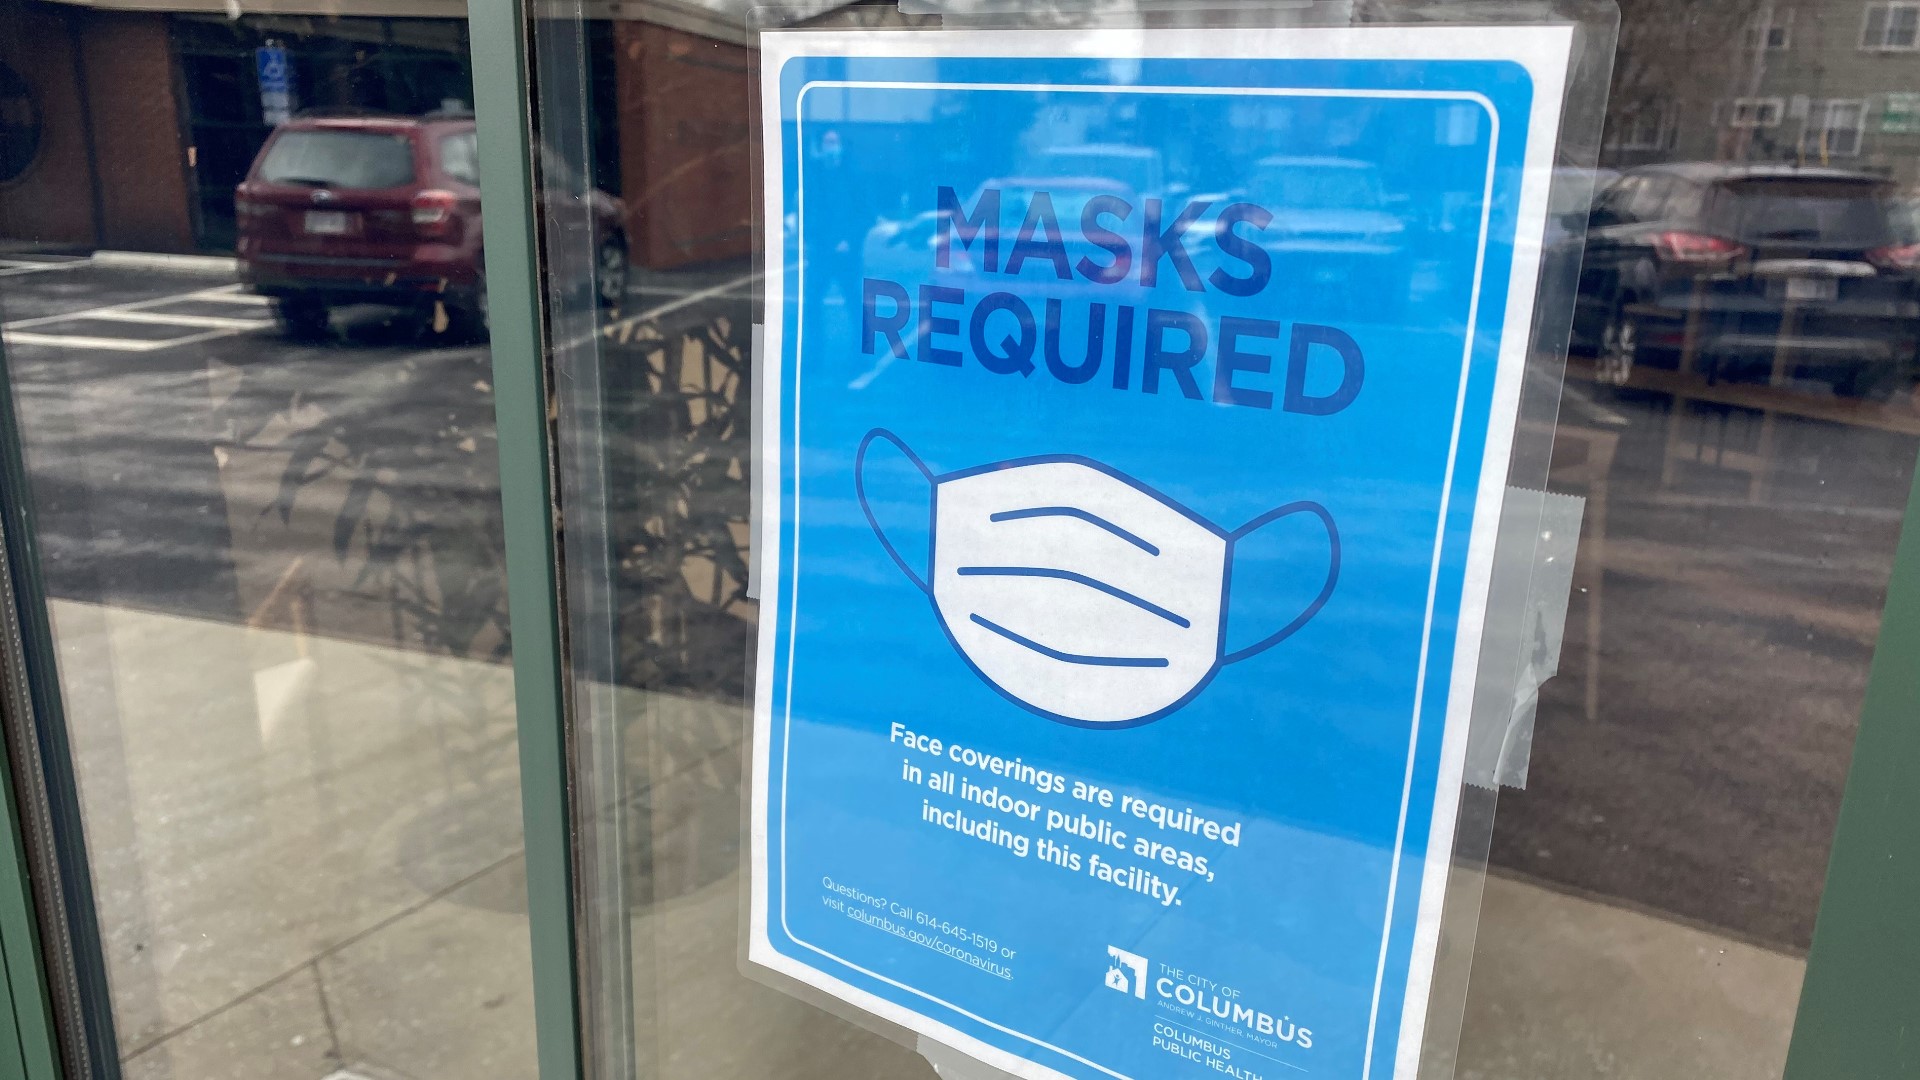 While safety is a top priority for local business owners, some are hoping relaxed mask guidance and lower case numbers will bring diners back.